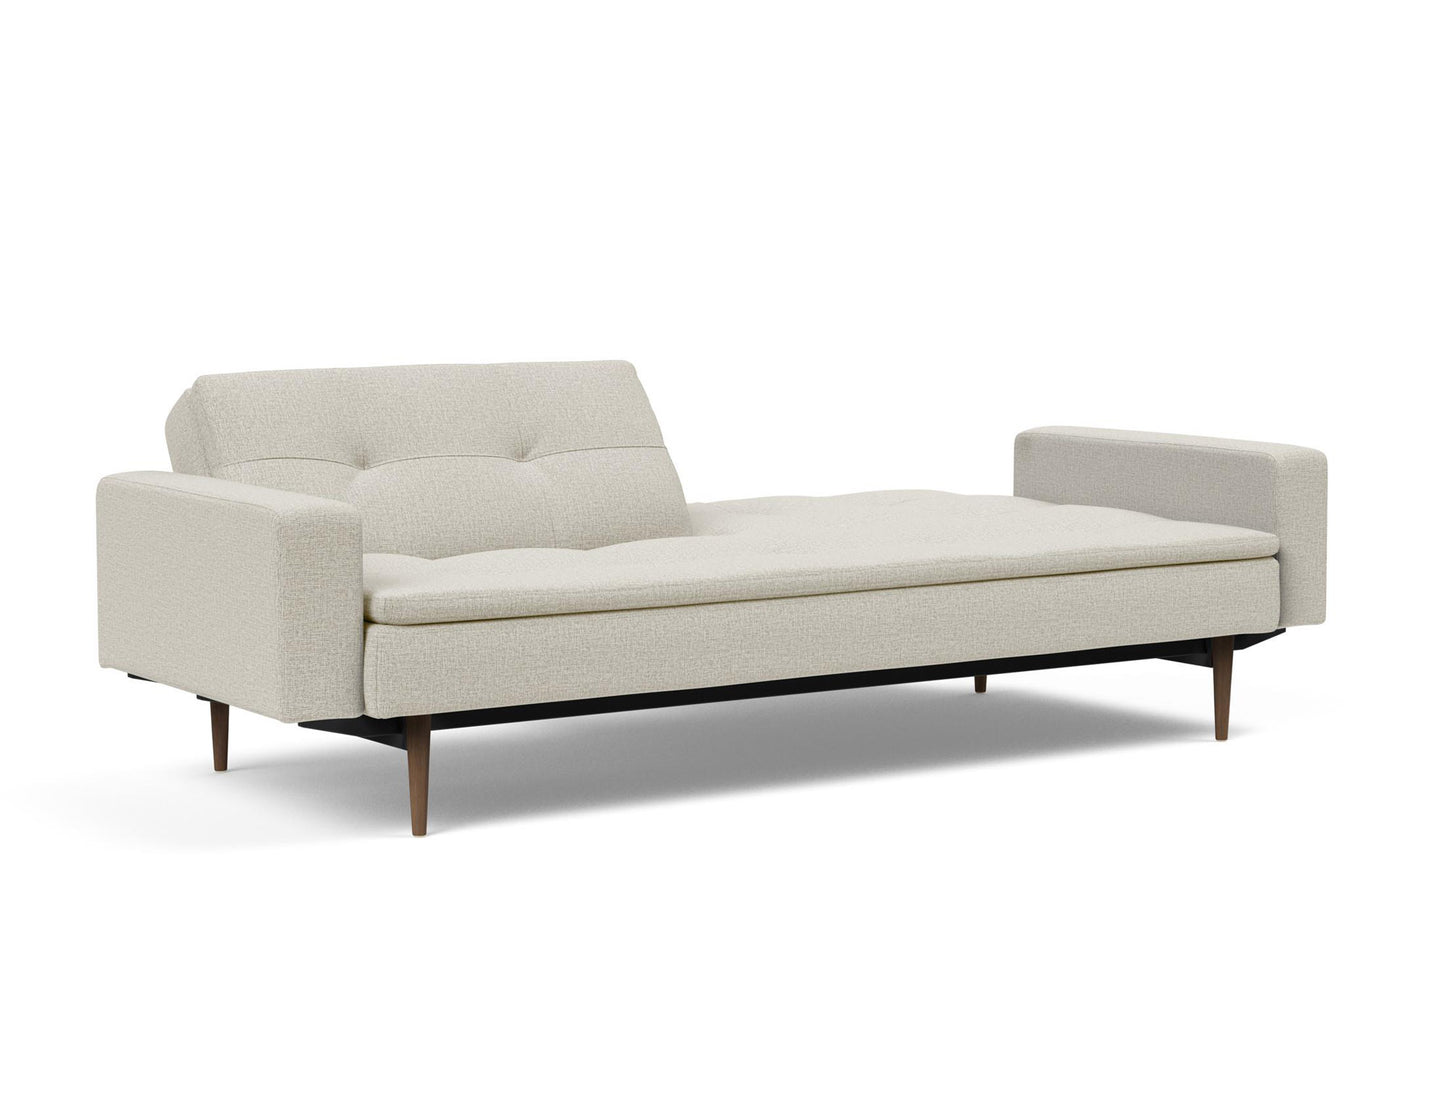 Innovation Living Dublexo Sofa Bed Dark Wood with Arms